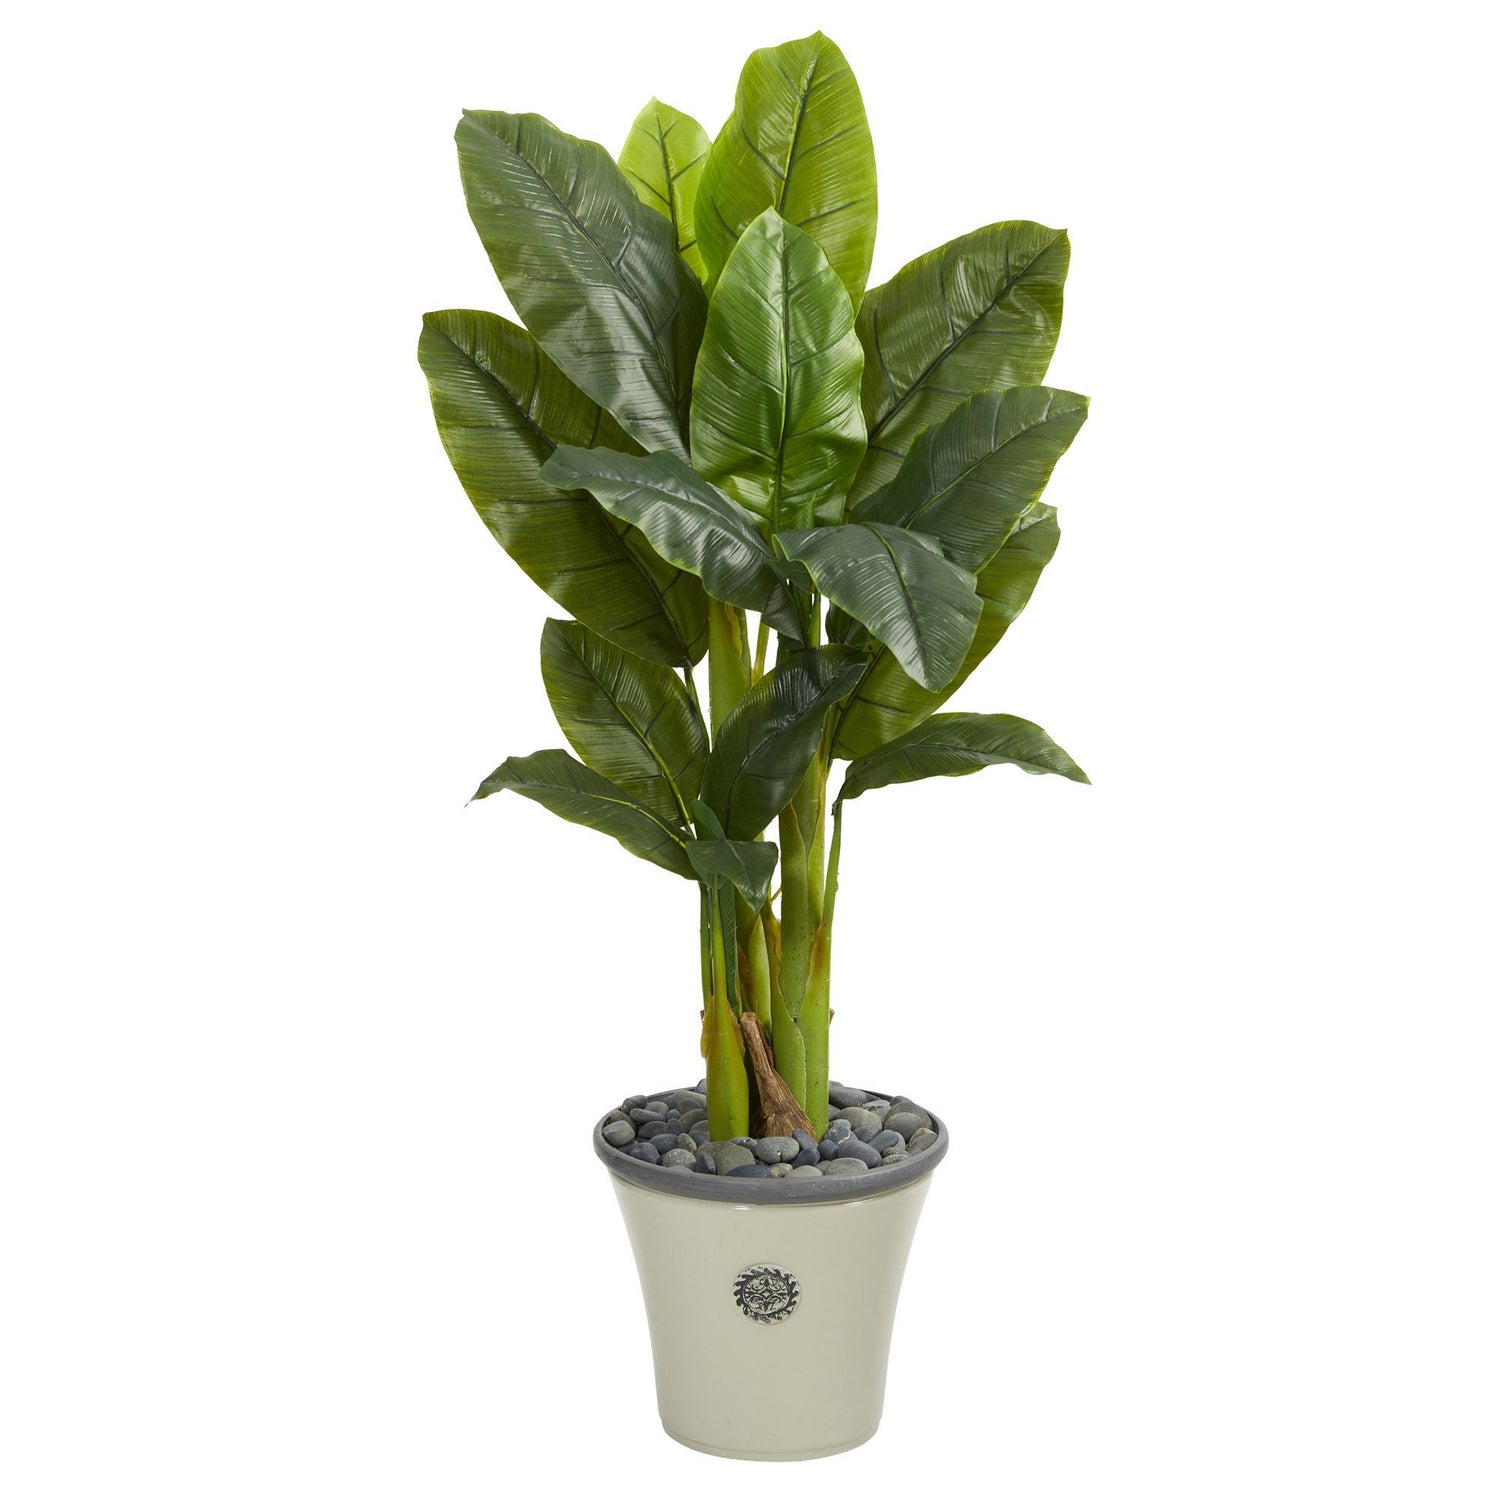 55” Triple Stalk Artificial Banana Tree in Decorative Planter (Real Touch)